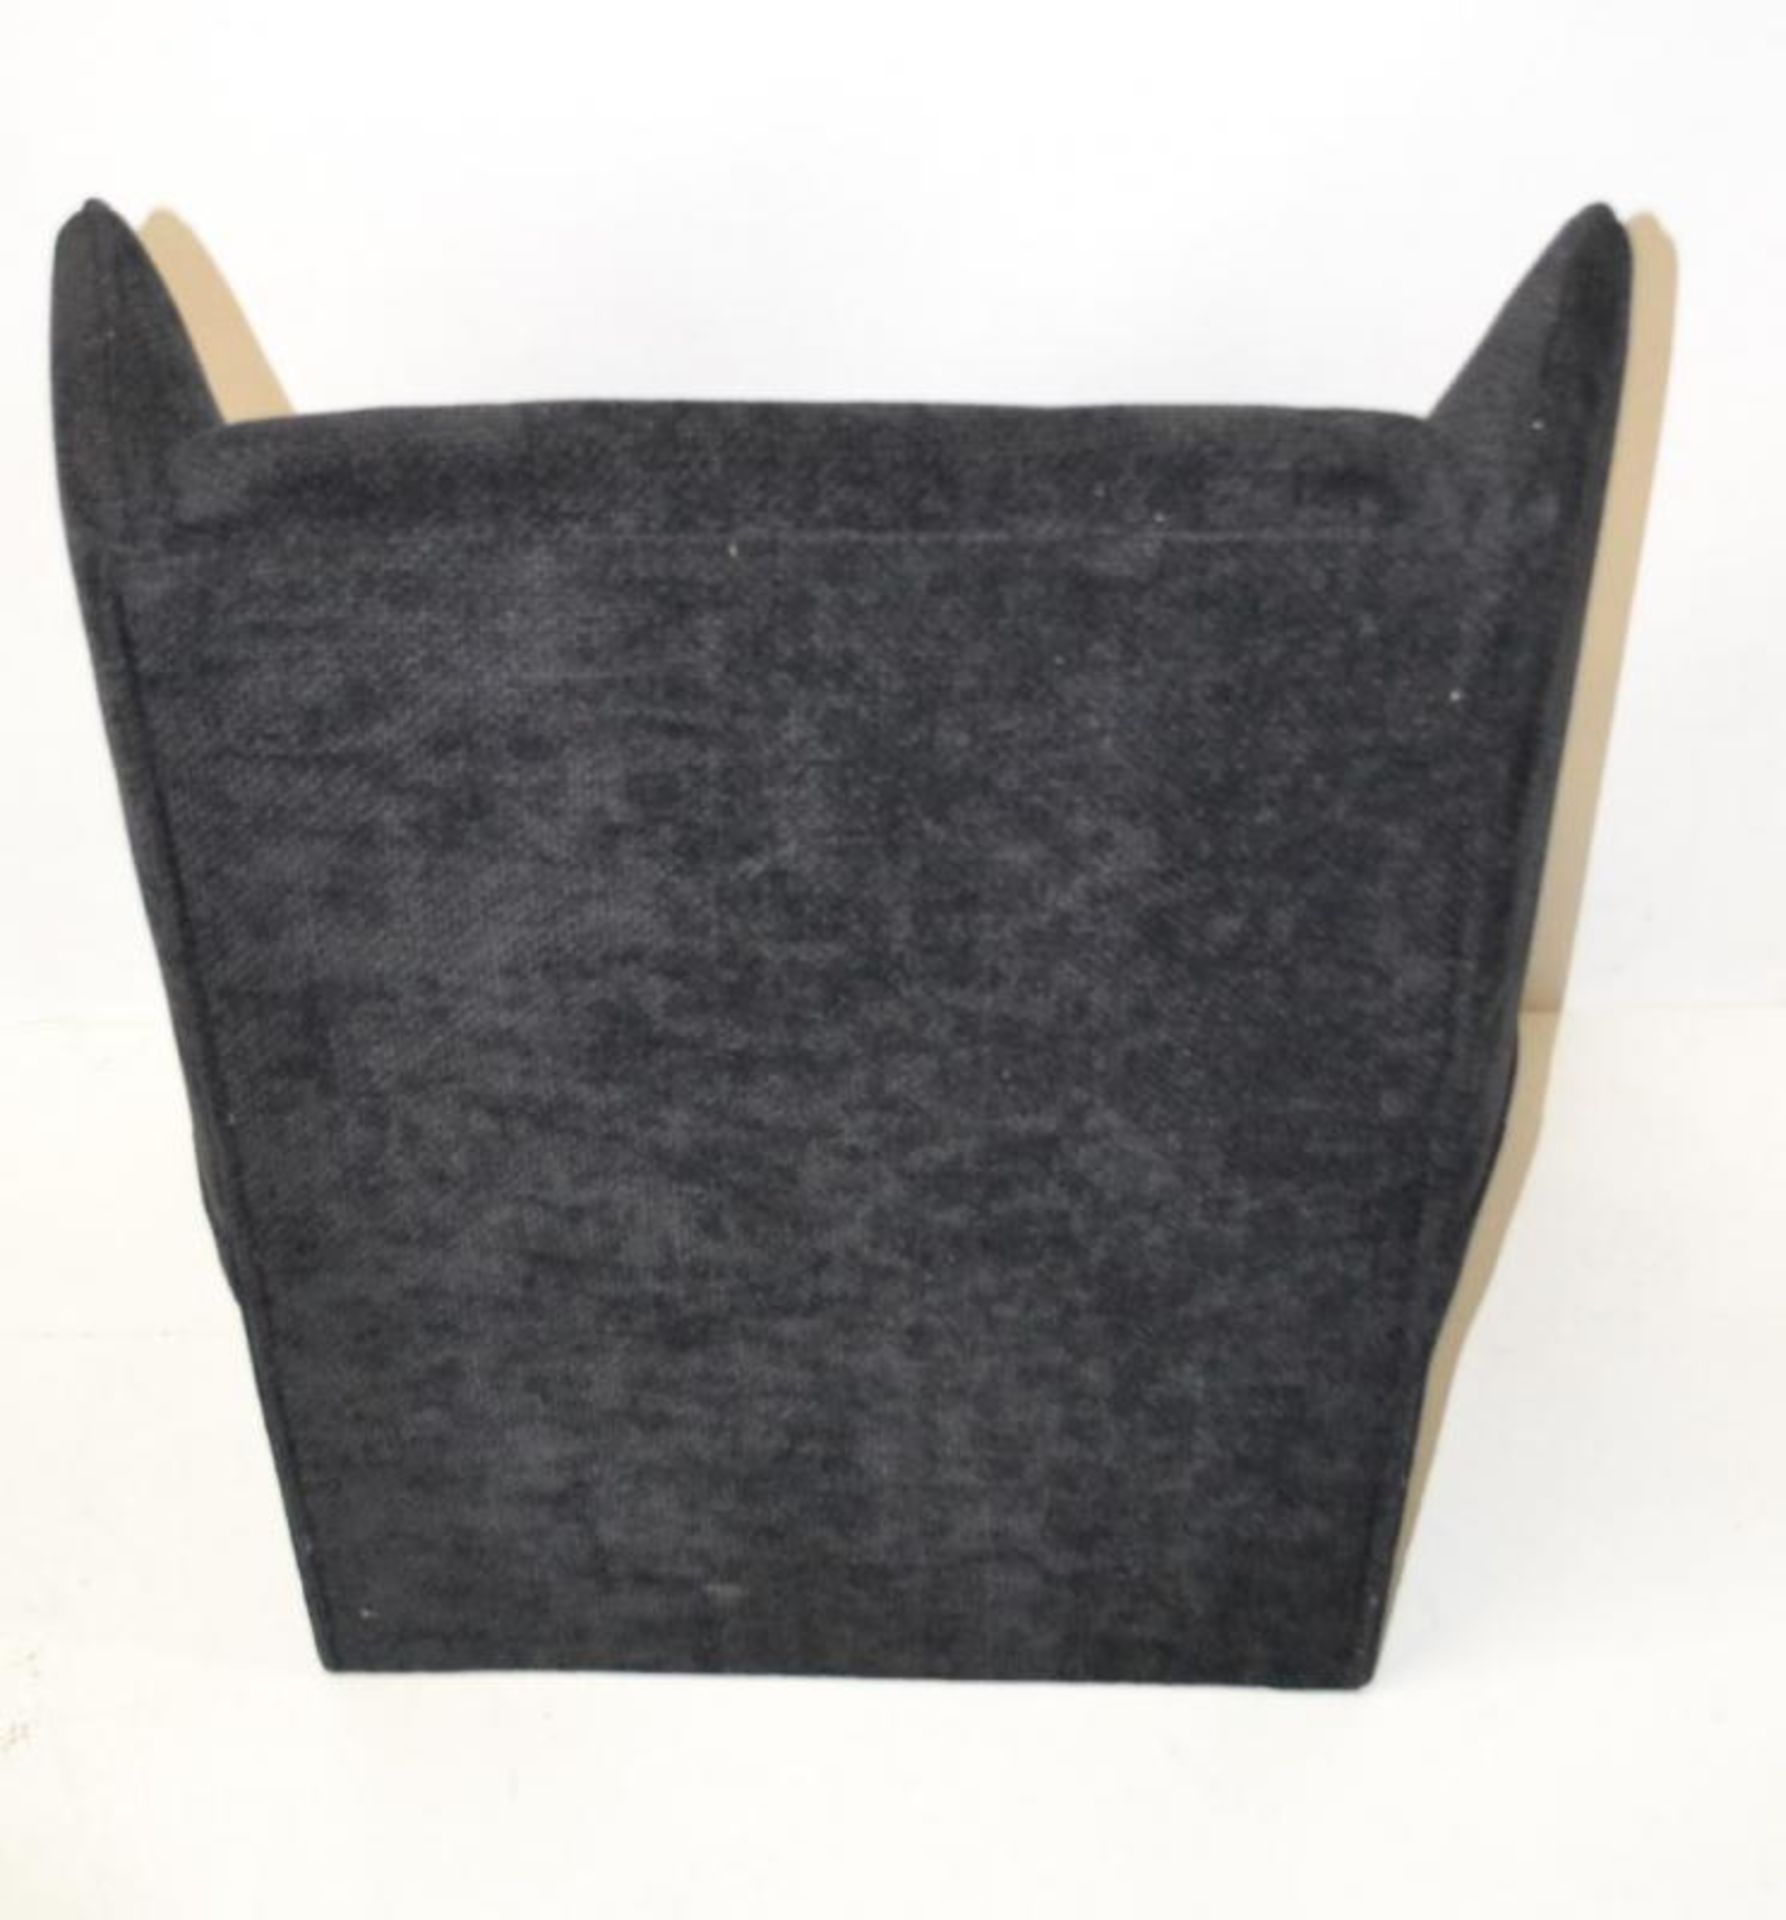 1 x Lounge Chair Finished In A Charcoal Fabric With 4 Walnut Legs - Ref: BLT373 - CL380 - NO VAT - - Image 5 of 9